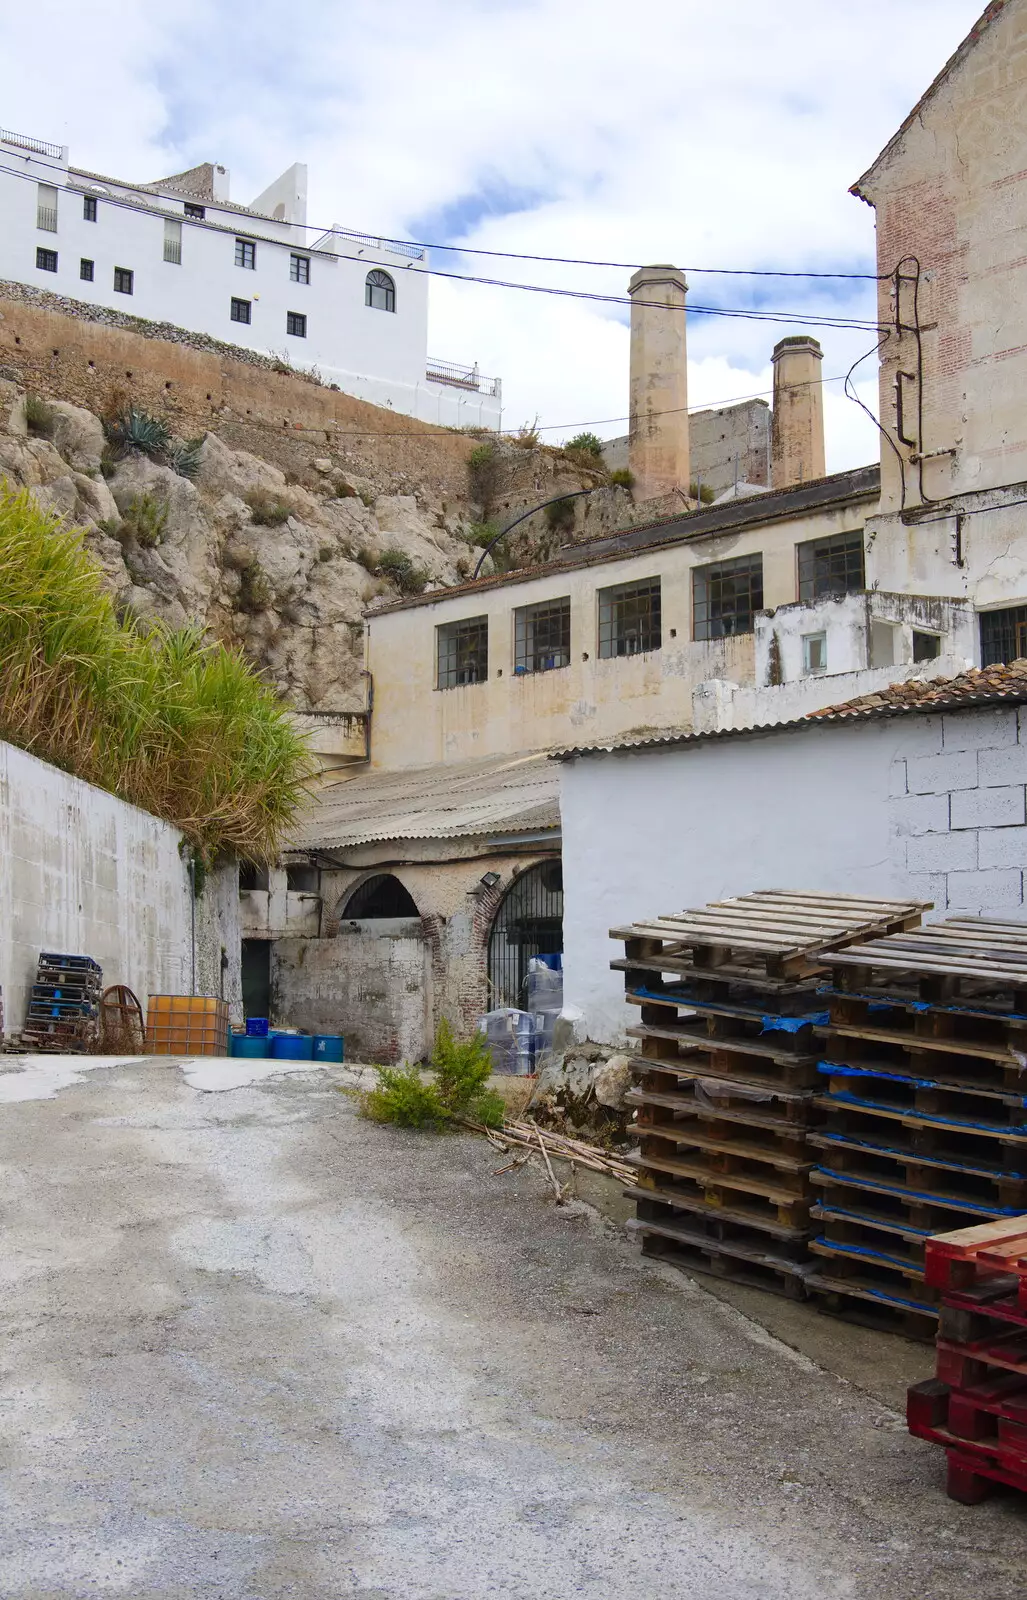 The derelict sugar-cane factory, from The Caves of Nerja, and Frigiliana, Andalusia, Spain - 18th April 2019